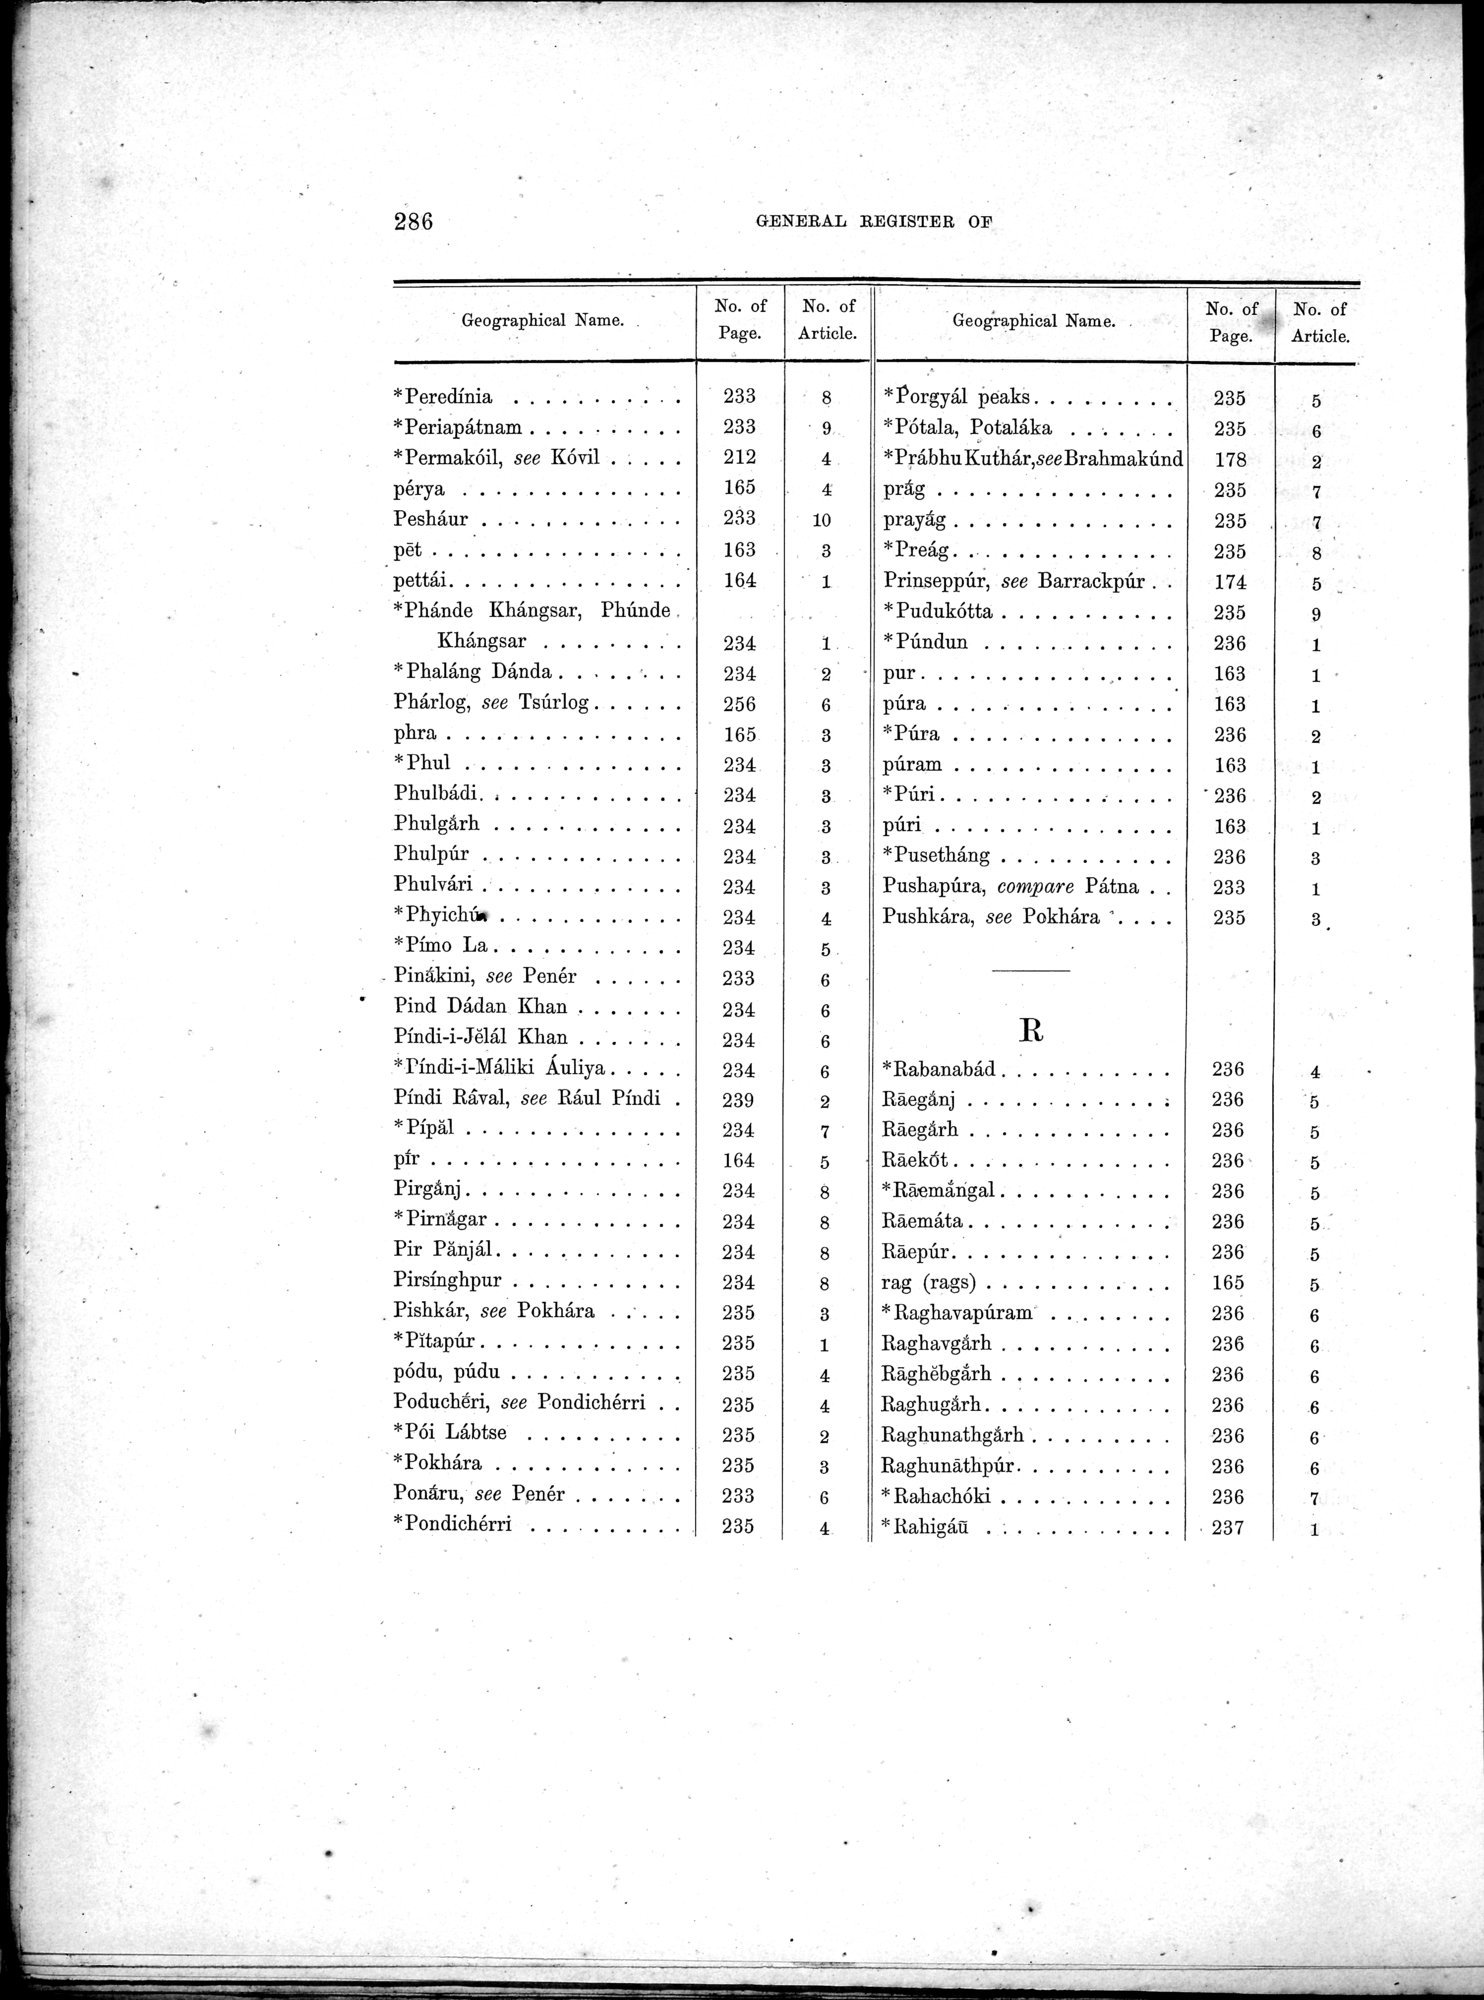 Results of a Scientific Mission to India and High Asia : vol.3 / Page 318 (Grayscale High Resolution Image)